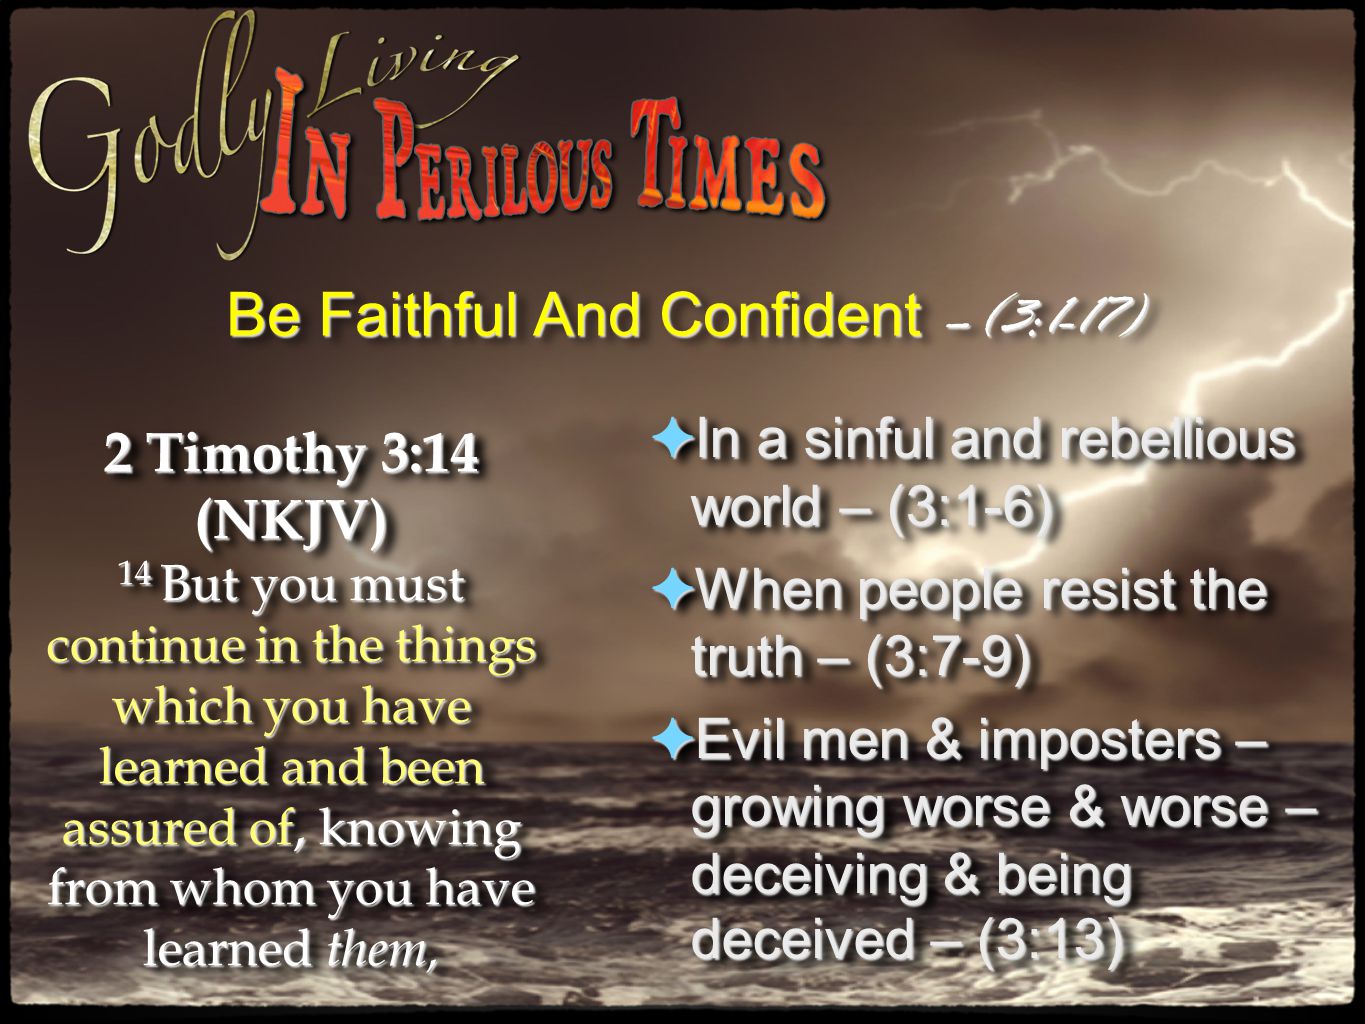 Be Faithful And Confident –(3:1-17) 2 Timothy 3:14 (NKJV) 14 But you must continue in the things which you have learned and been assured of, knowing from whom you have learned them, 2 Timothy 3:14 (NKJV) 14 But you must continue in the things which you have learned and been assured of, knowing from whom you have learned them, ✦ In a sinful and rebellious world – (3:1-6) ✦ When people resist the truth – (3:7-9) ✦ Evil men & imposters – growing worse & worse – deceiving & being deceived – (3:13) ✦ In a sinful and rebellious world – (3:1-6) ✦ When people resist the truth – (3:7-9) ✦ Evil men & imposters – growing worse & worse – deceiving & being deceived – (3:13)